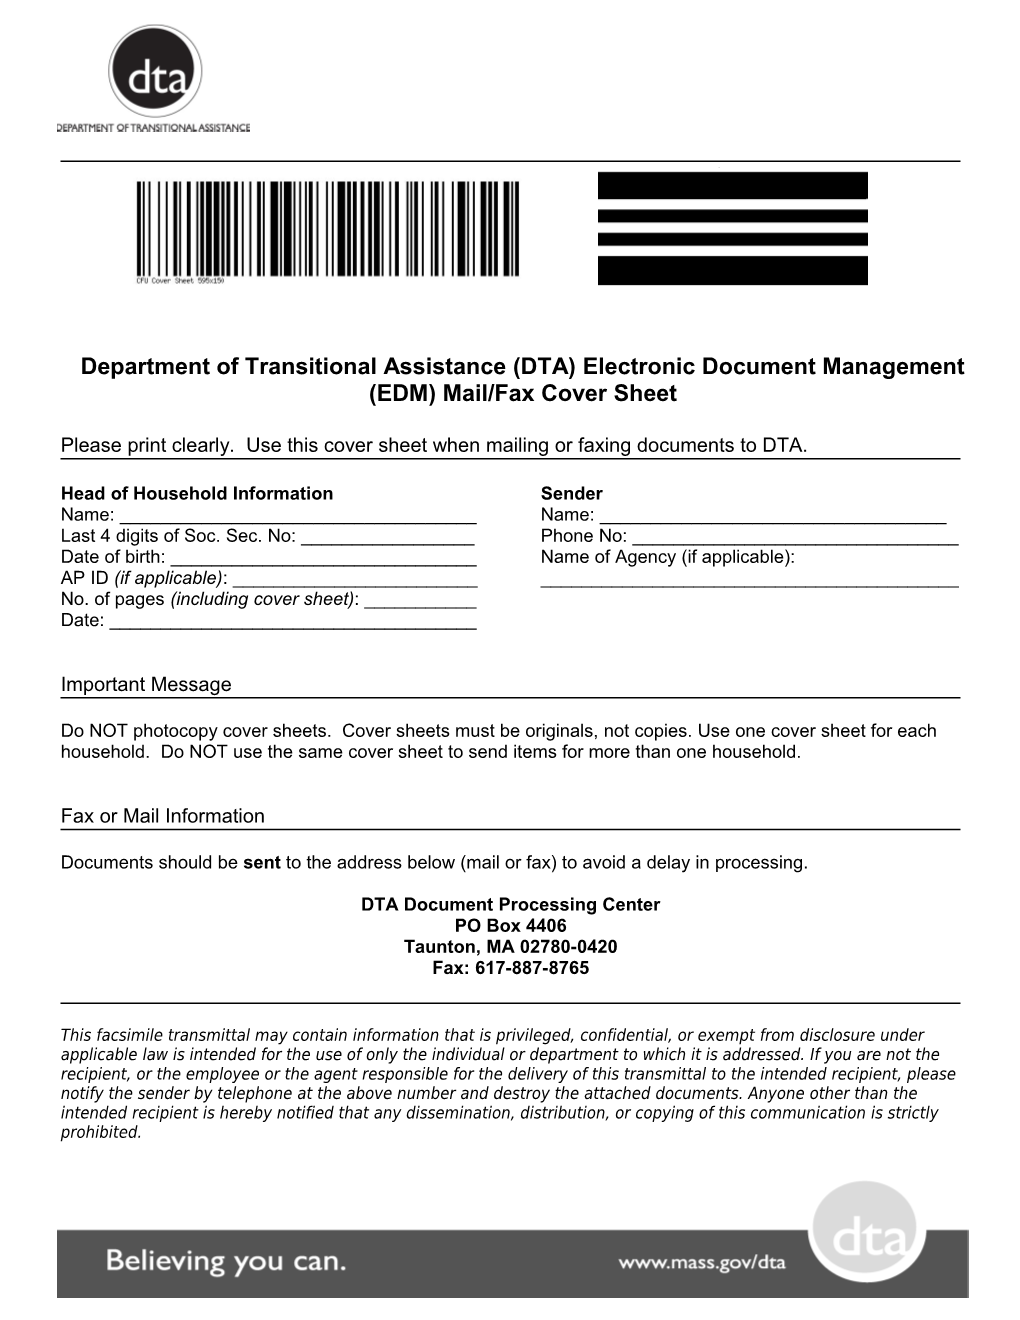 Department of Transitional Assistance (DTA) Electronic Document Management (EDM) Mail/Fax